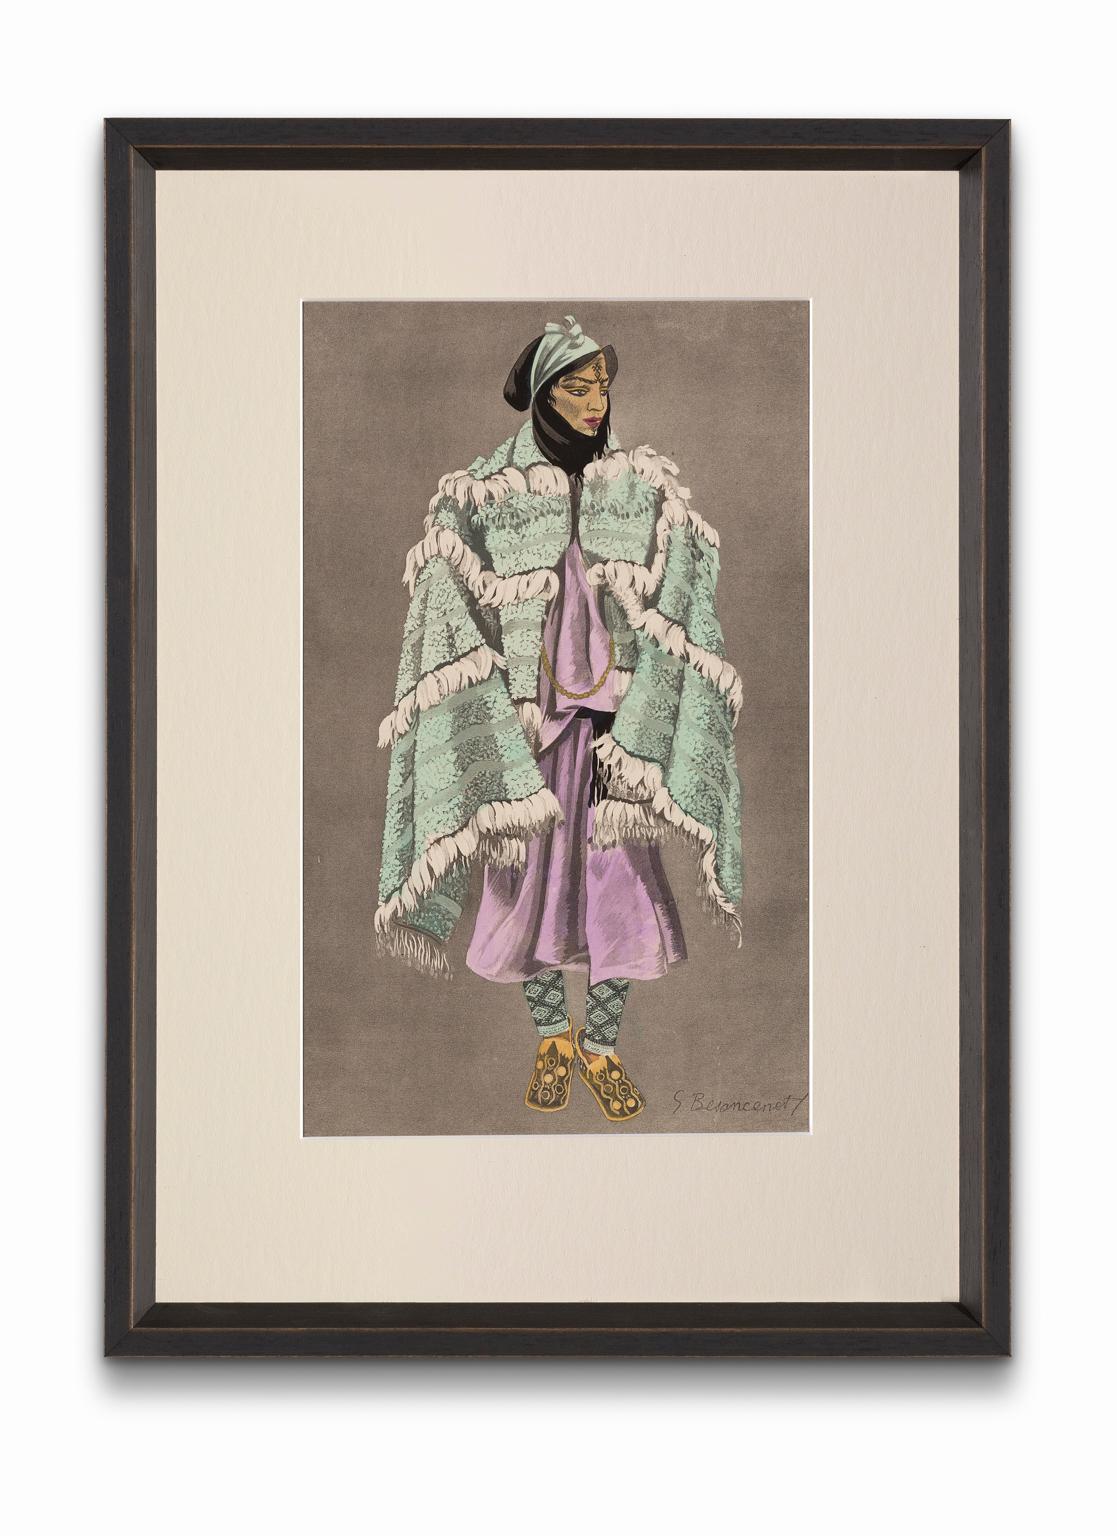 Jean Besancenot Portrait Print - "Woman of the Aït MGuild" from "Costumes of Morocco", Gouache on Paper